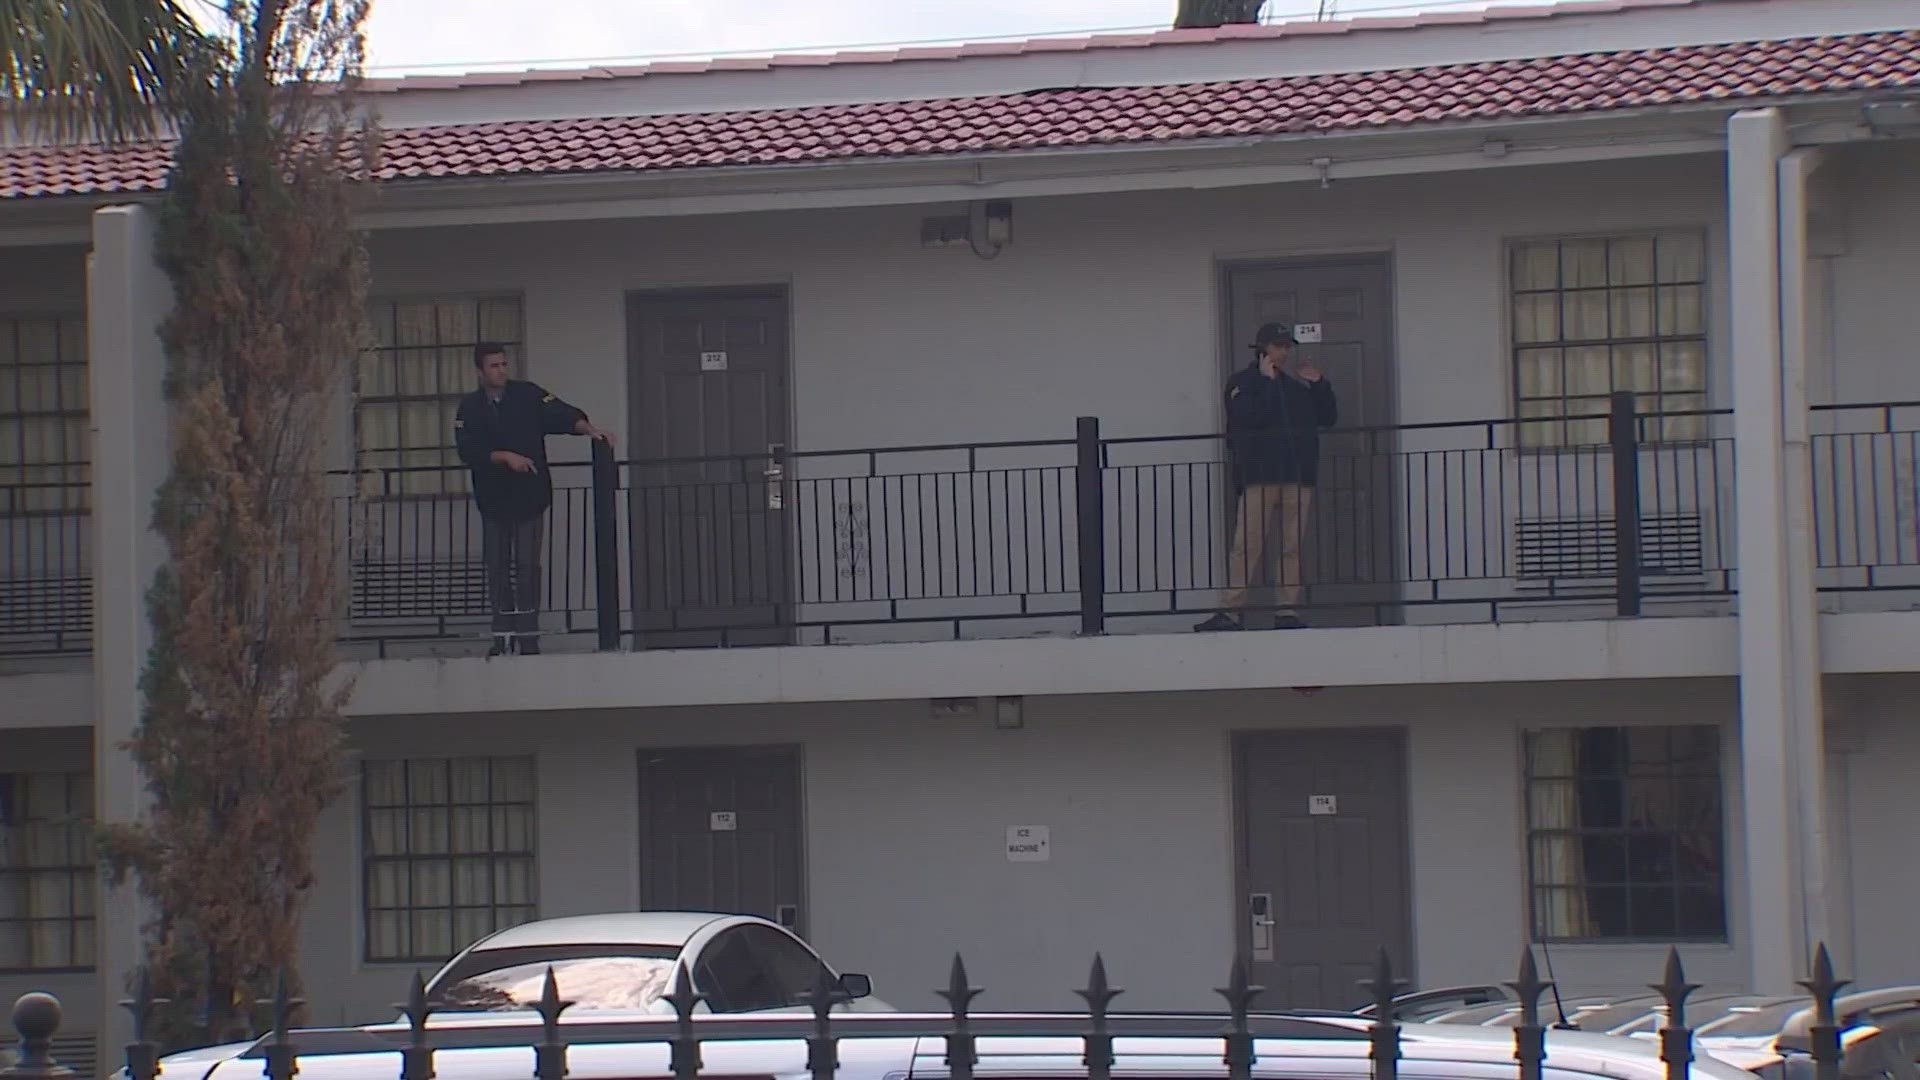 The FBI said a rescue operation took place at a motel off Beltway 8 in the Greenspoint area on Thursday morning.